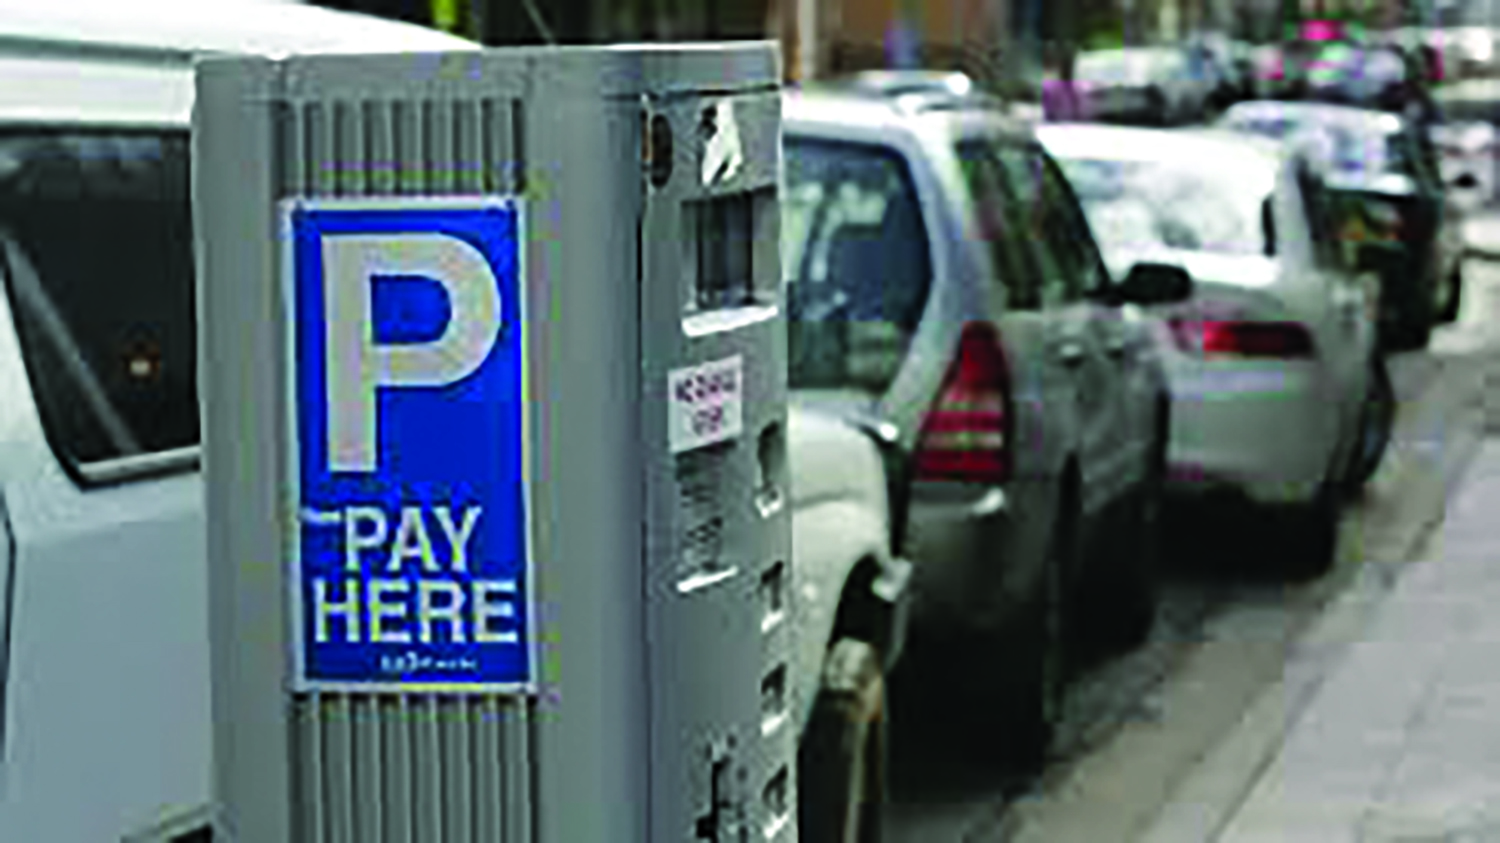 Parking Meter fiasco Plays Itself Out On Taxpayers’ Dime